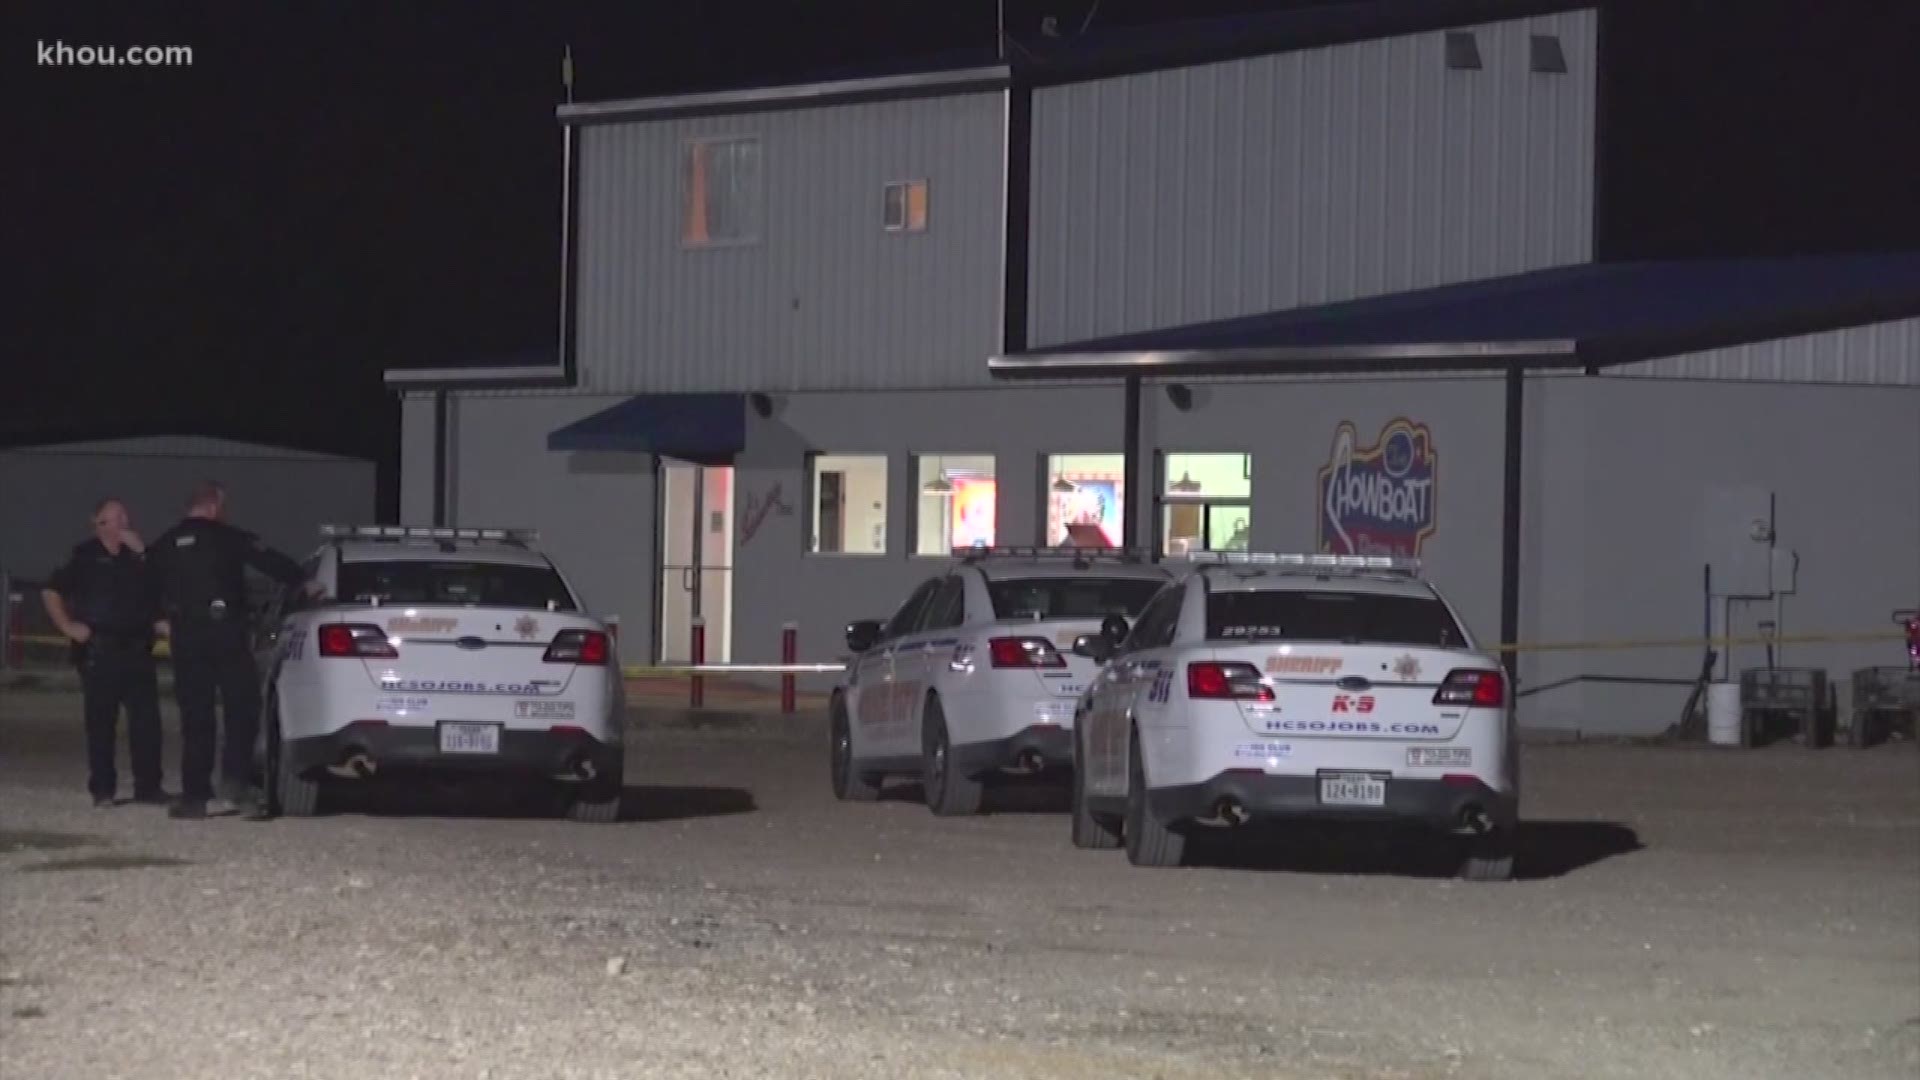 A manager at a drive-in movie theater shot and killed a man who deputies say assaulted her with a baseball bat during an armed robbery overnight.